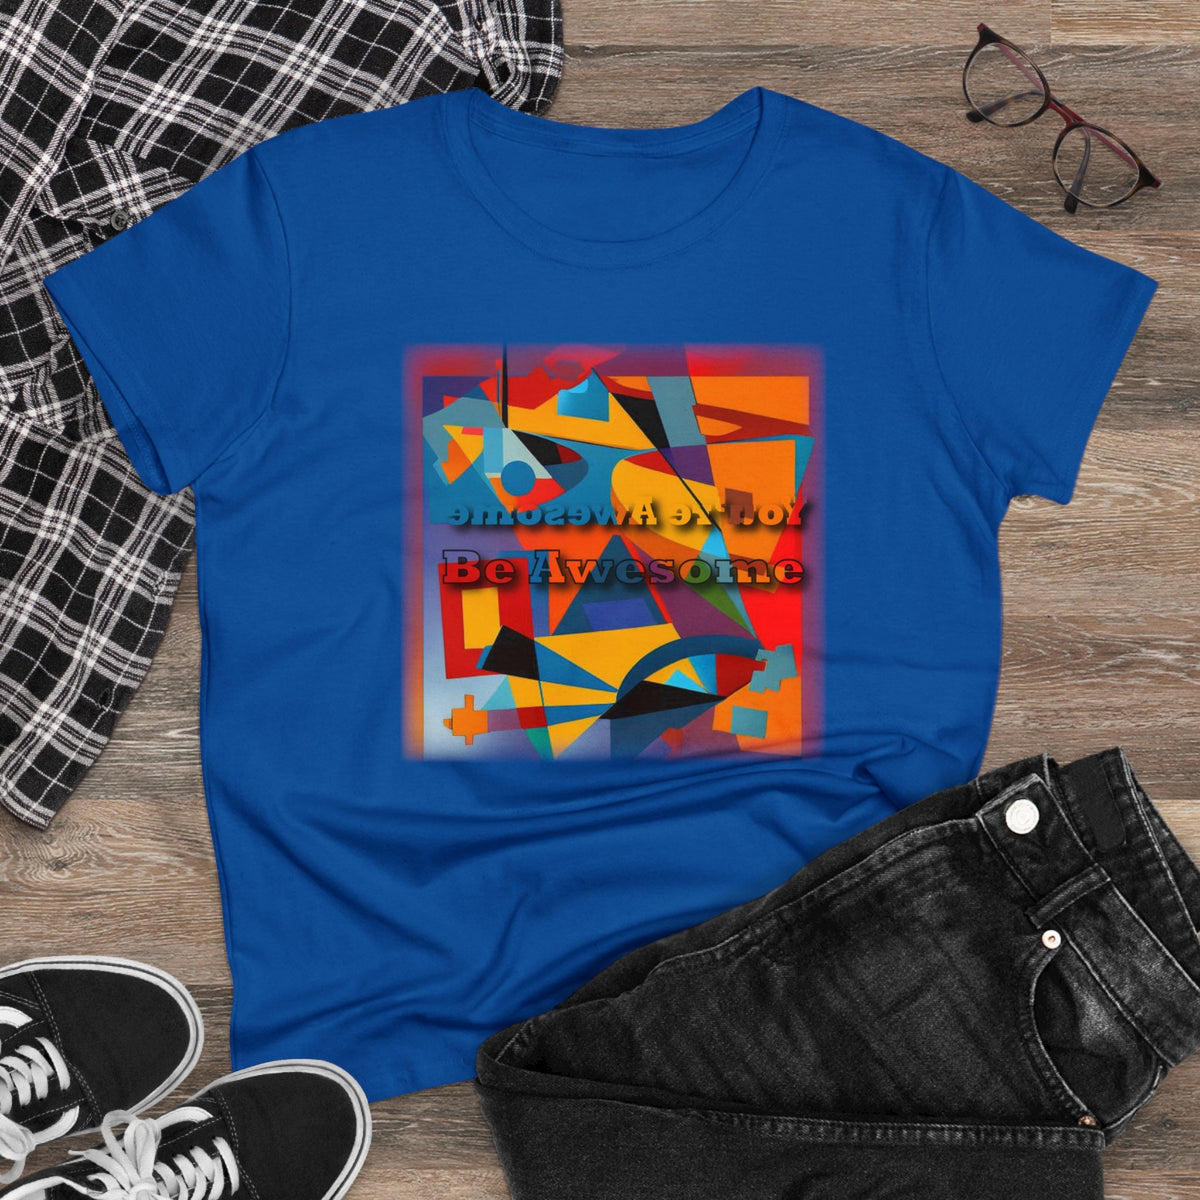 Inspirational T Shirts - Be Awesome 